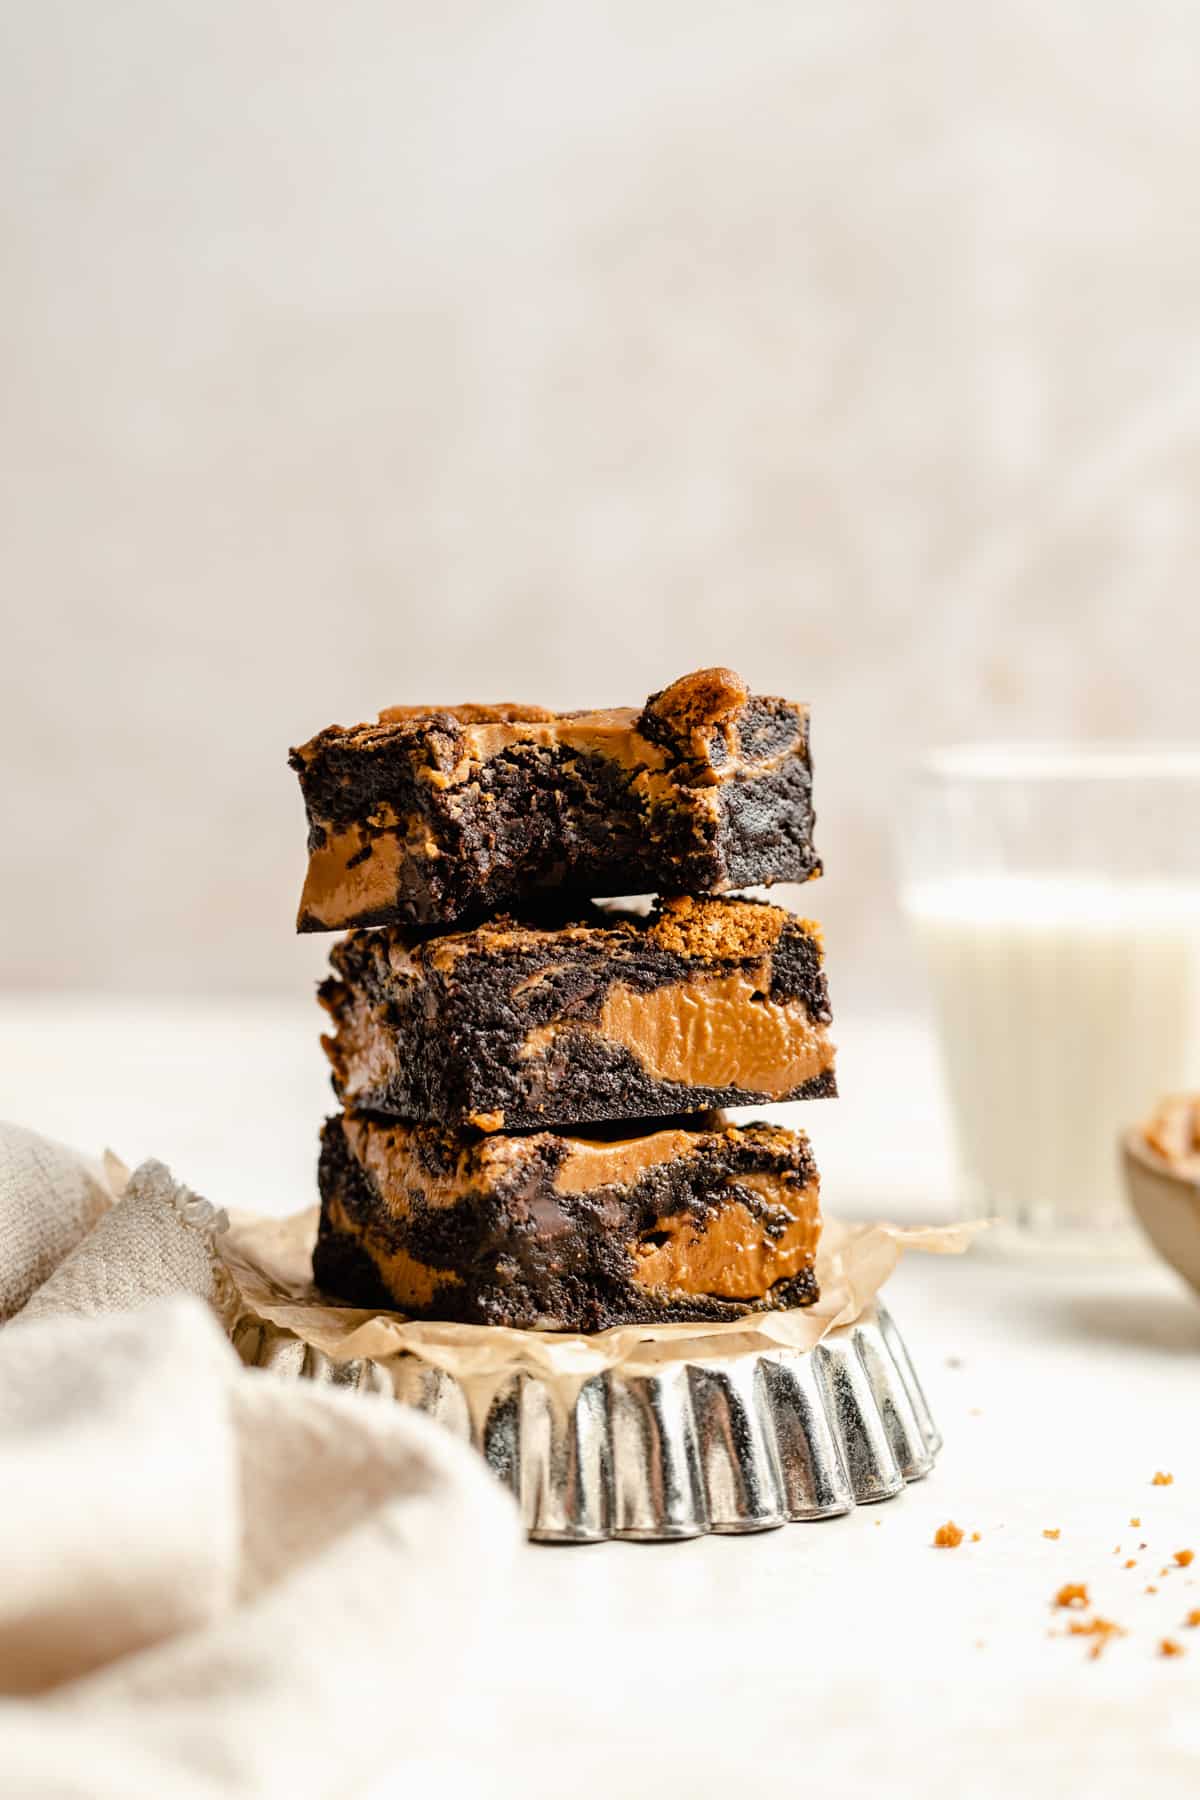 A stack of gooey fudgy biscoff brownies on a metal dish with one on top with a bite taken out showing the insides.